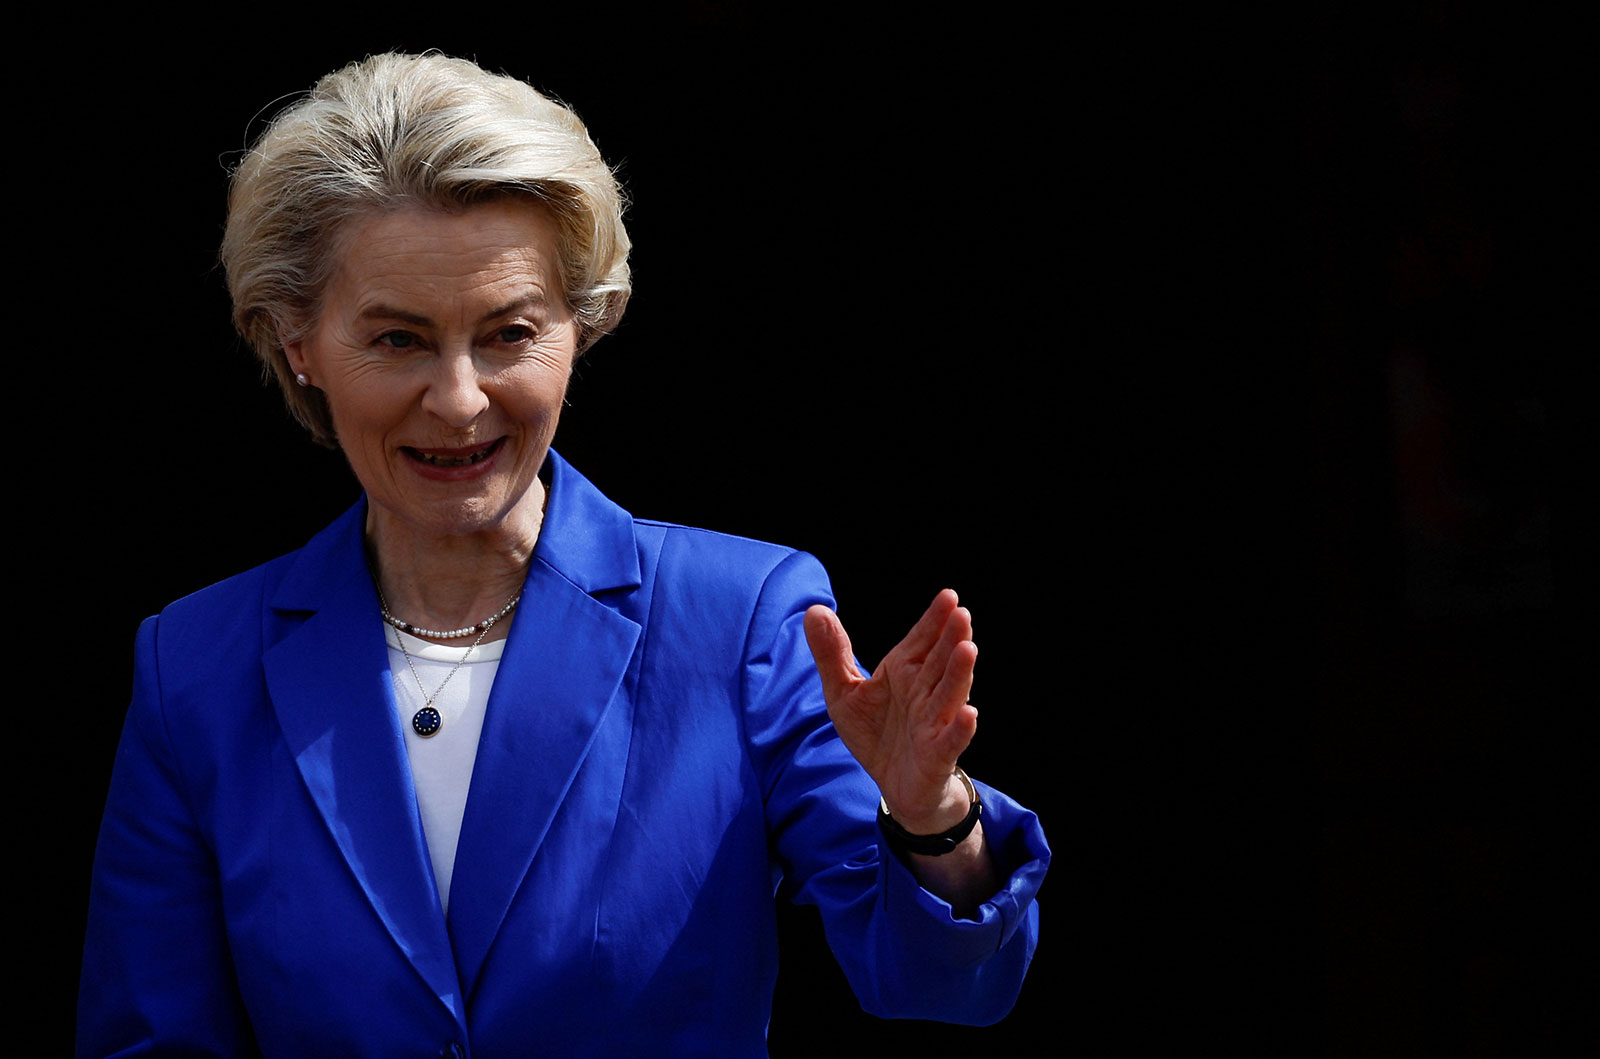 European Commission President Ursula von der Leyen gestures on the day of an event marking the 25th anniversary of the Good Friday Agreement at Queen's University, in Belfast, Northern Ireland, April 19.